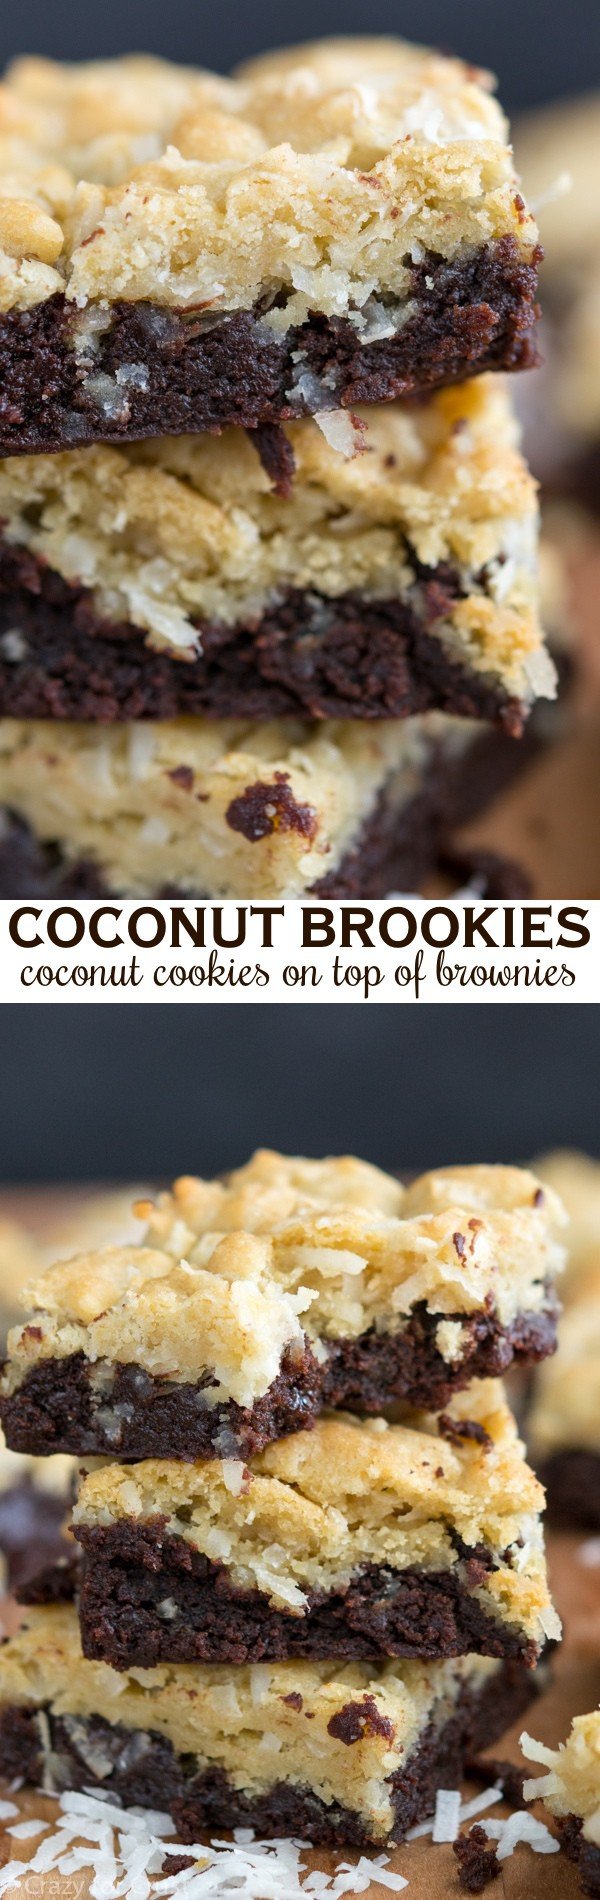 Coconut Brookies are part brownie, part coconut sugar cookies. Two easy recipes combine into one decadent bar cookie. This is the perfect potluck recipe!